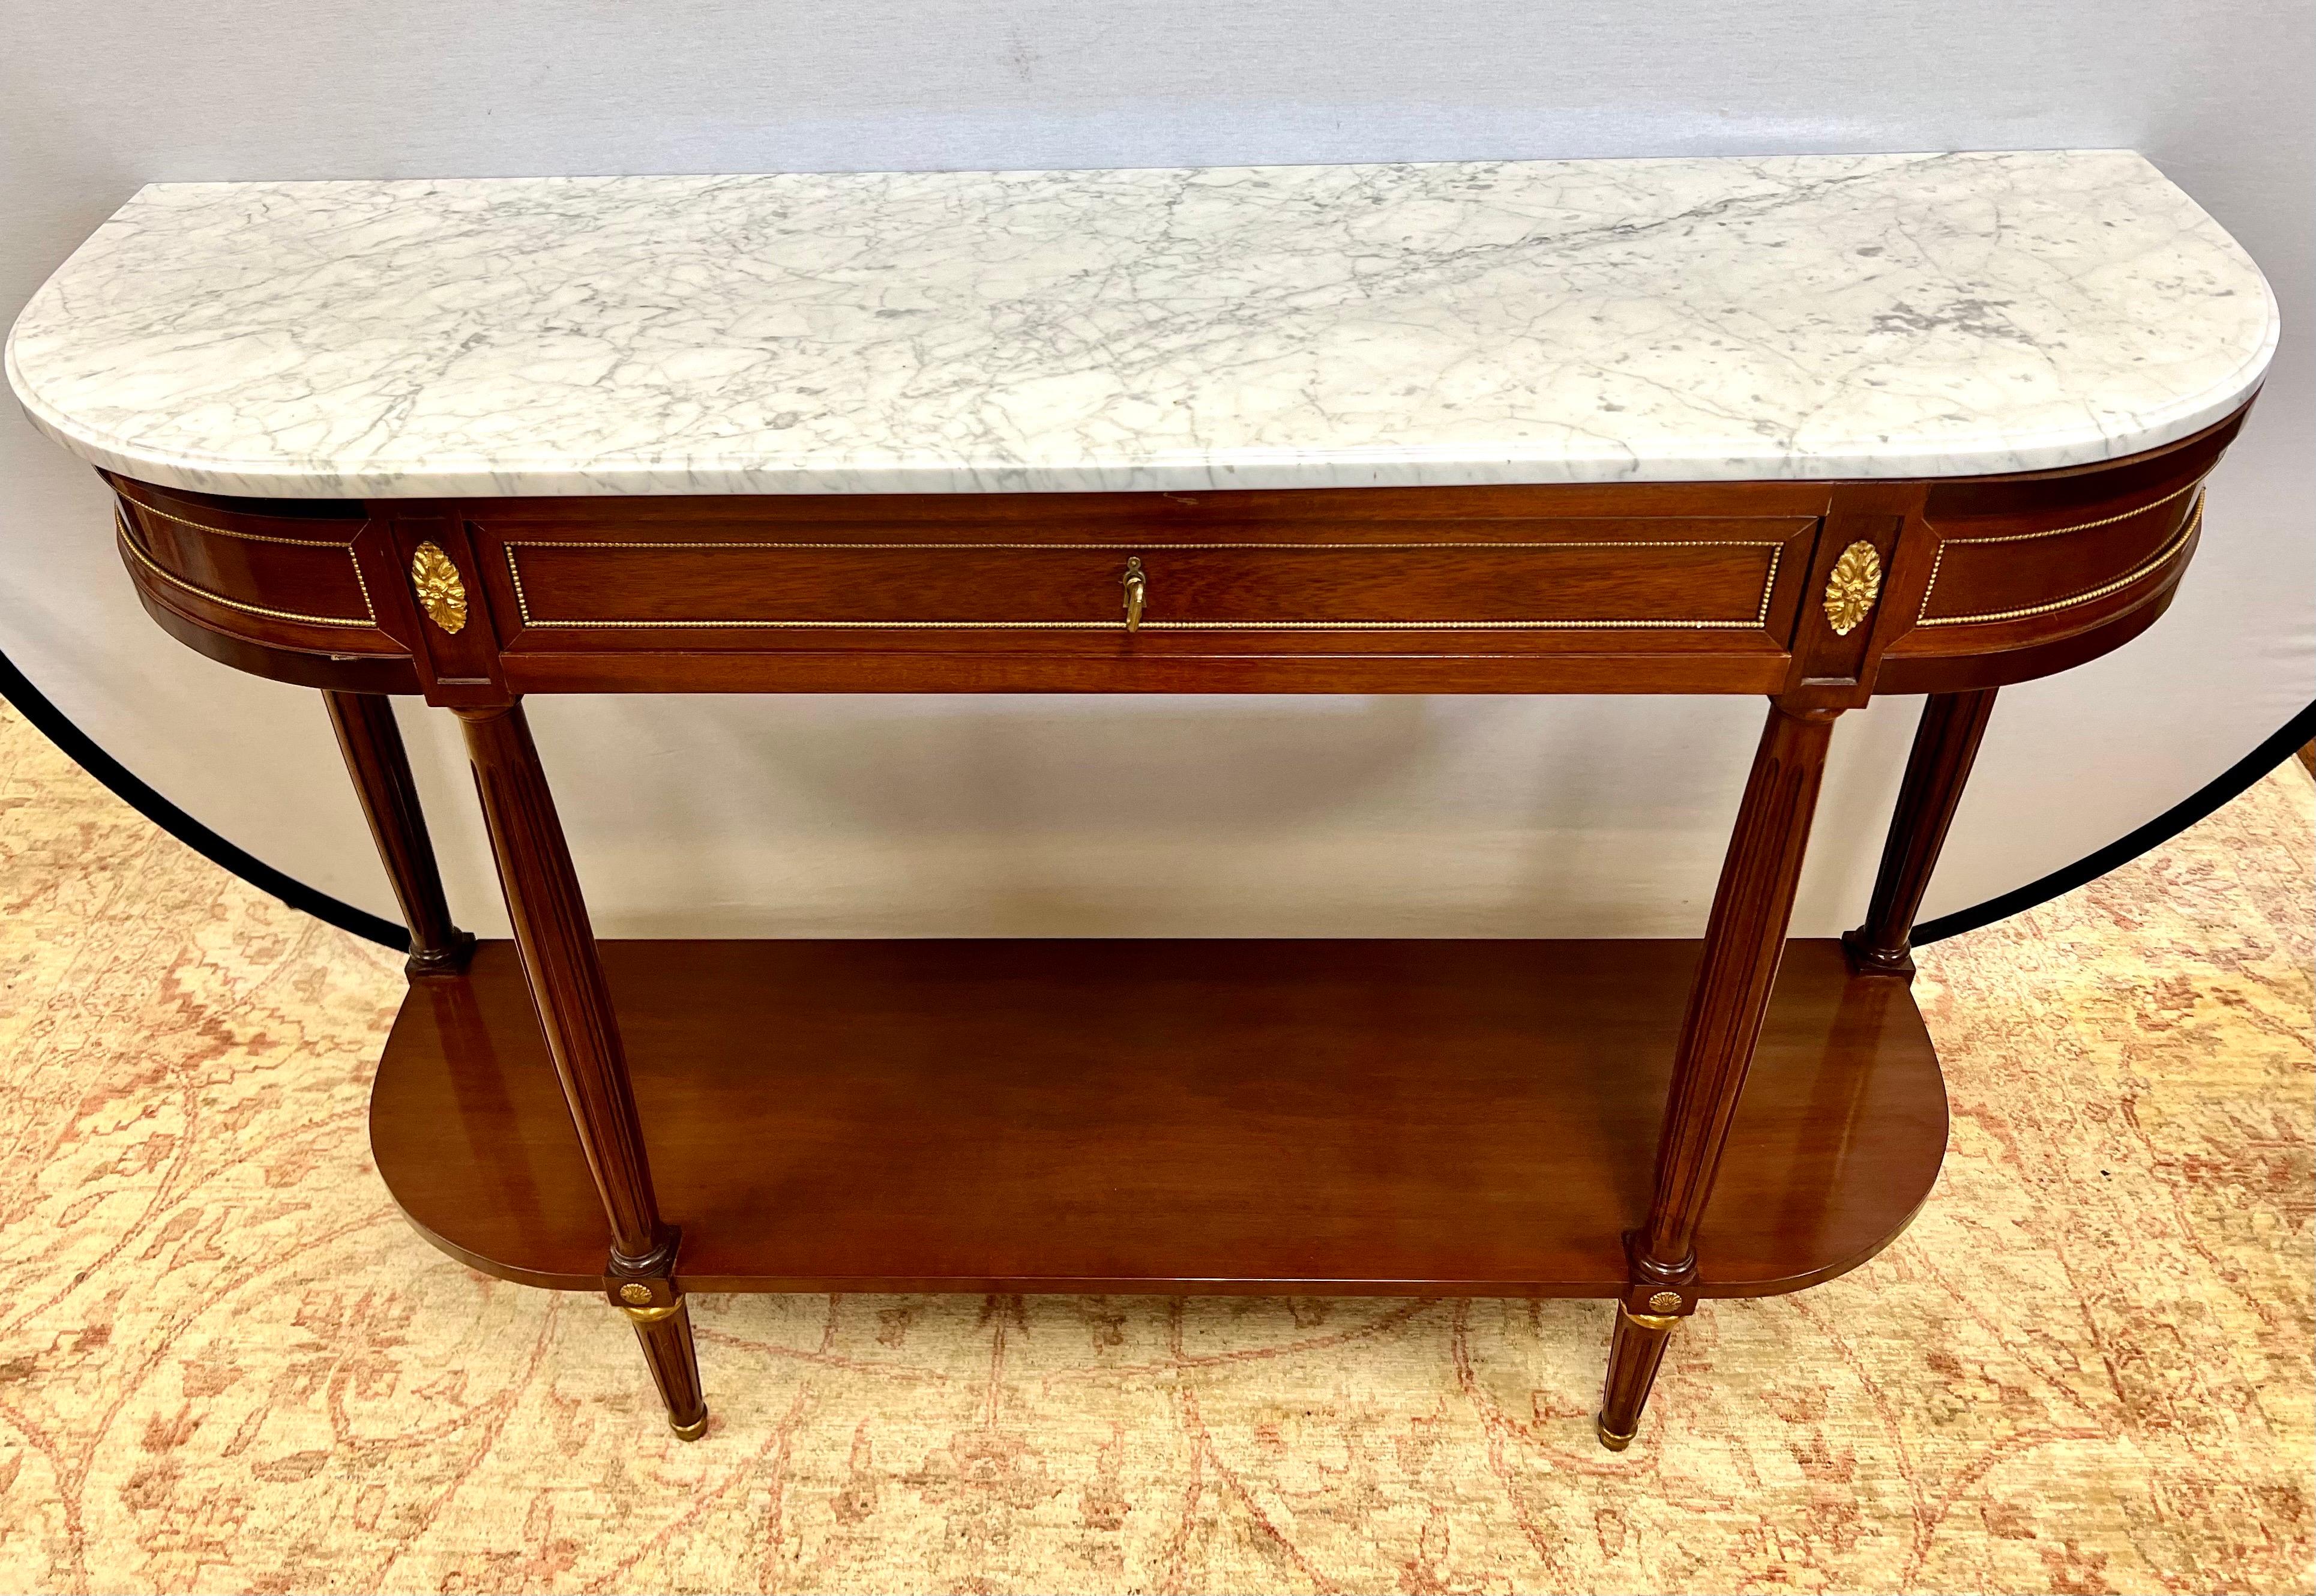 Elegant mahogany server with grand marble top. Note there is a minute chip at top of marble that is hardly noticeable and does not detract at all. Great scale and better lines. Features two tiers that allows for more storage. Would make a wonderful